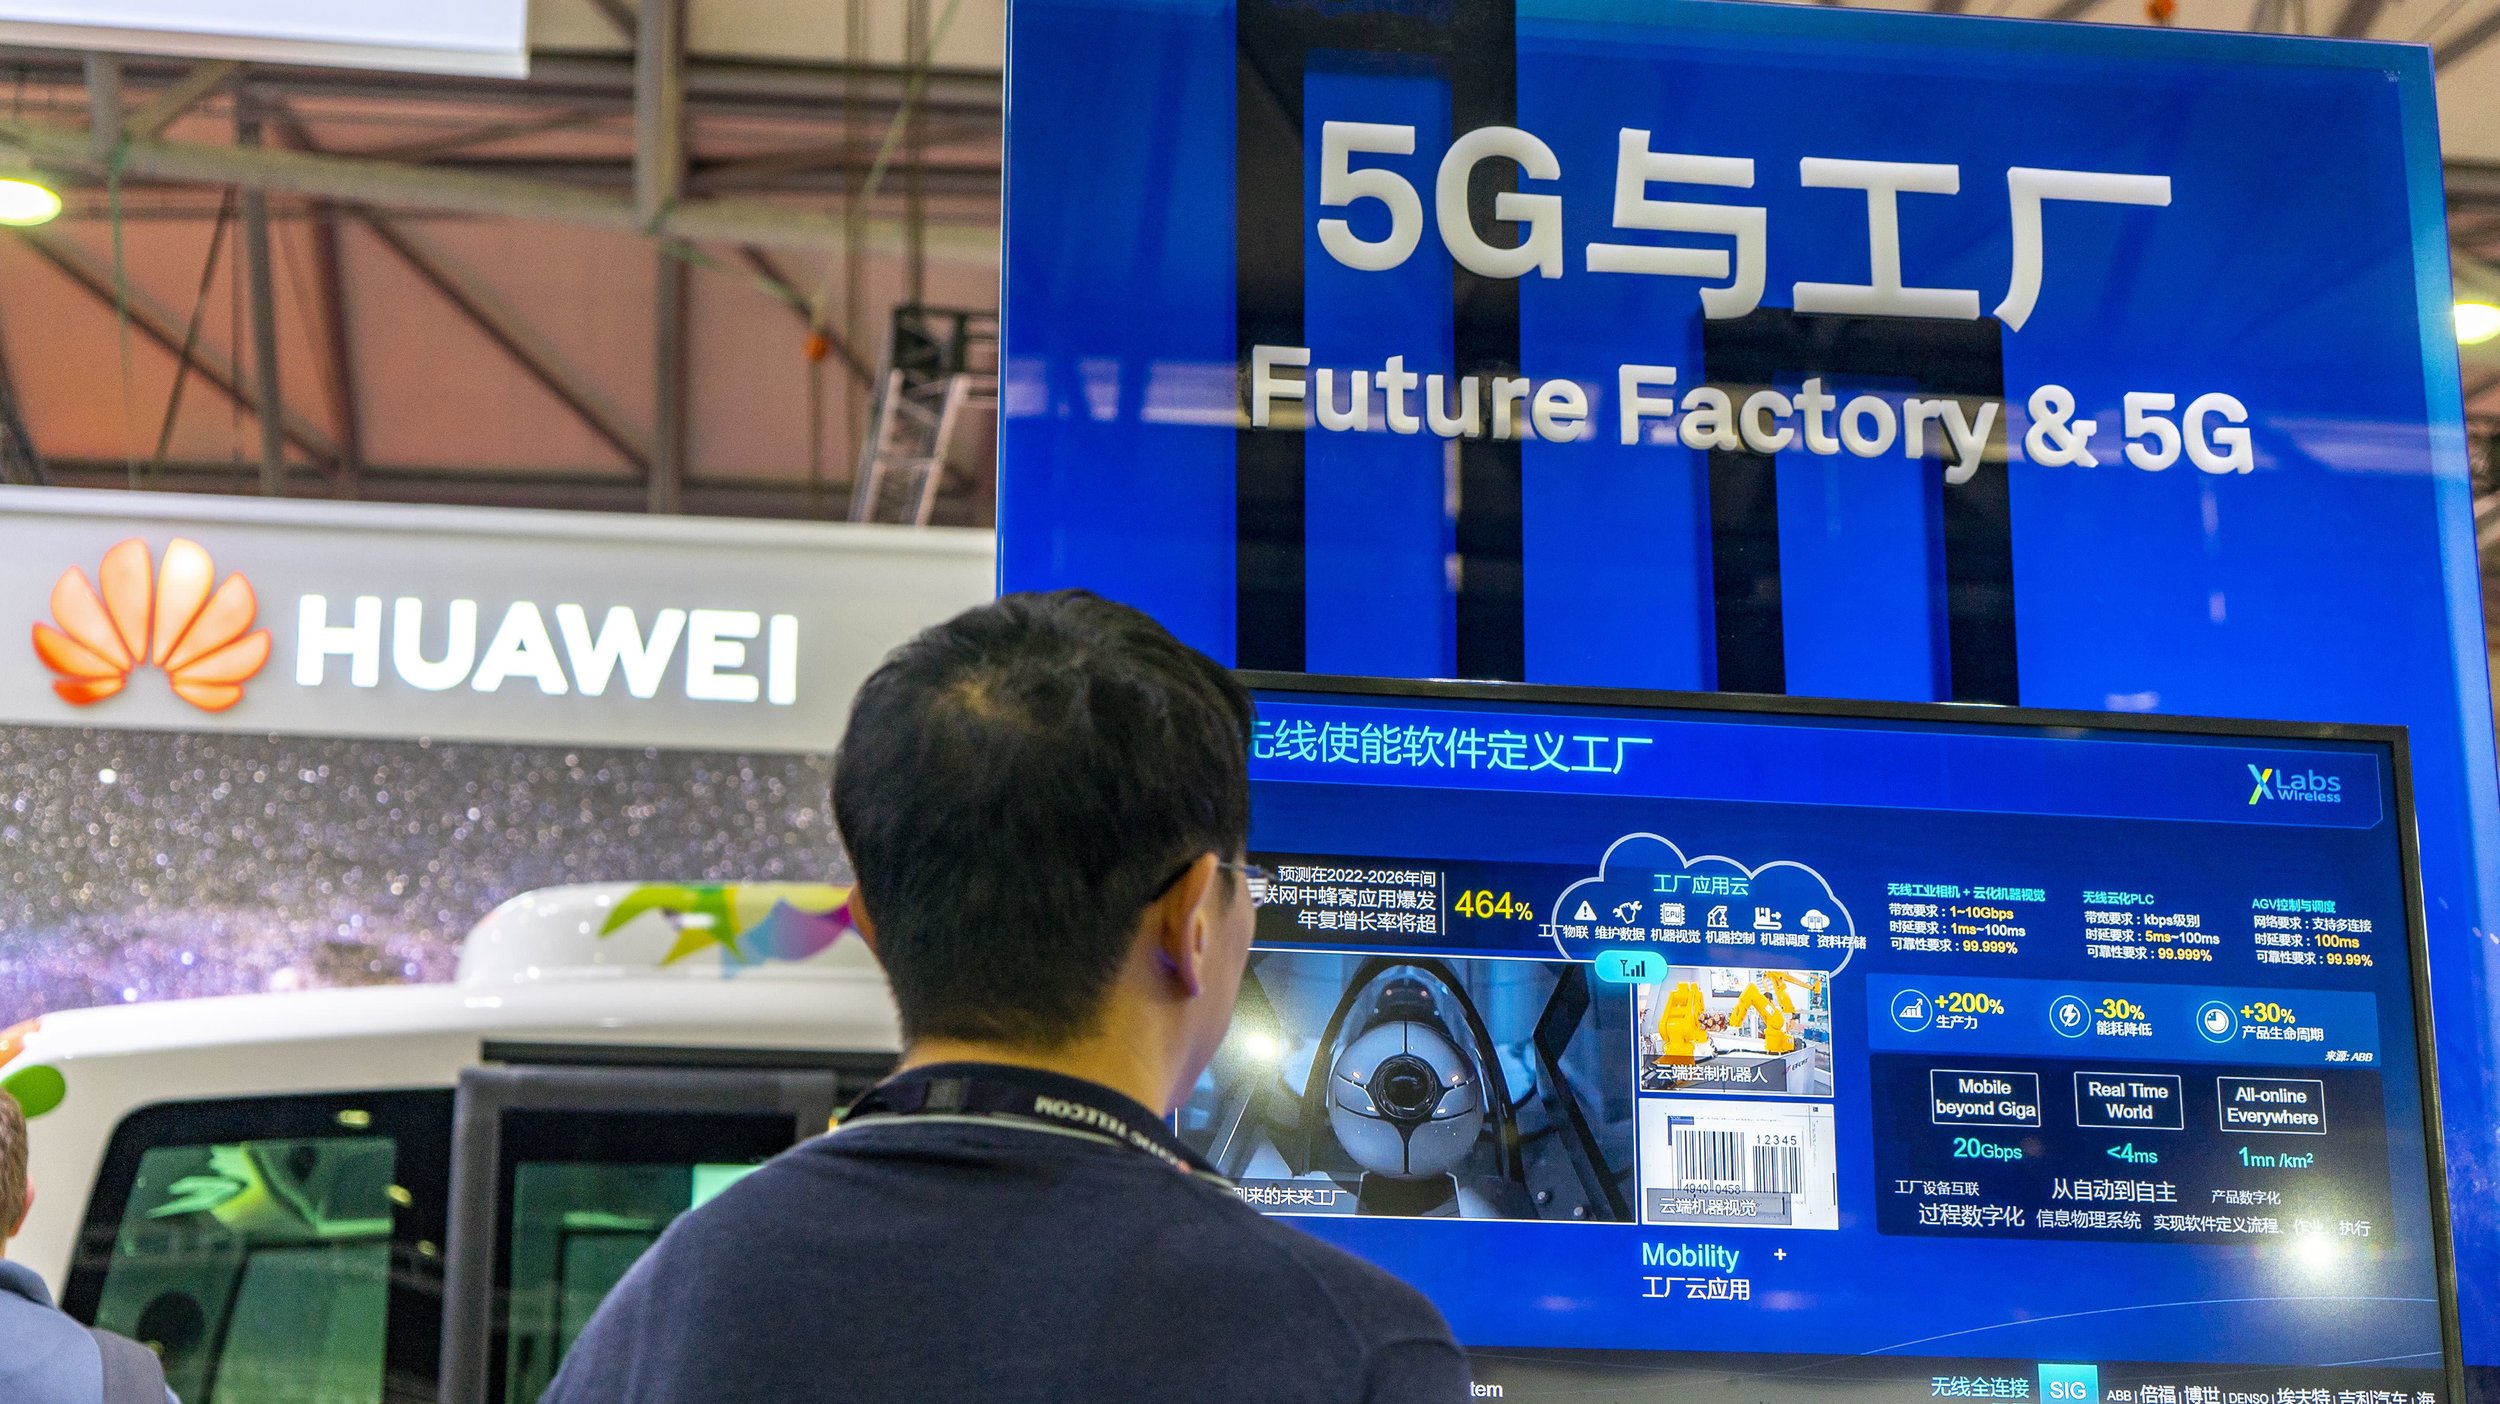 Beijing’s global 5G ambitions threaten to disrupt telecoms